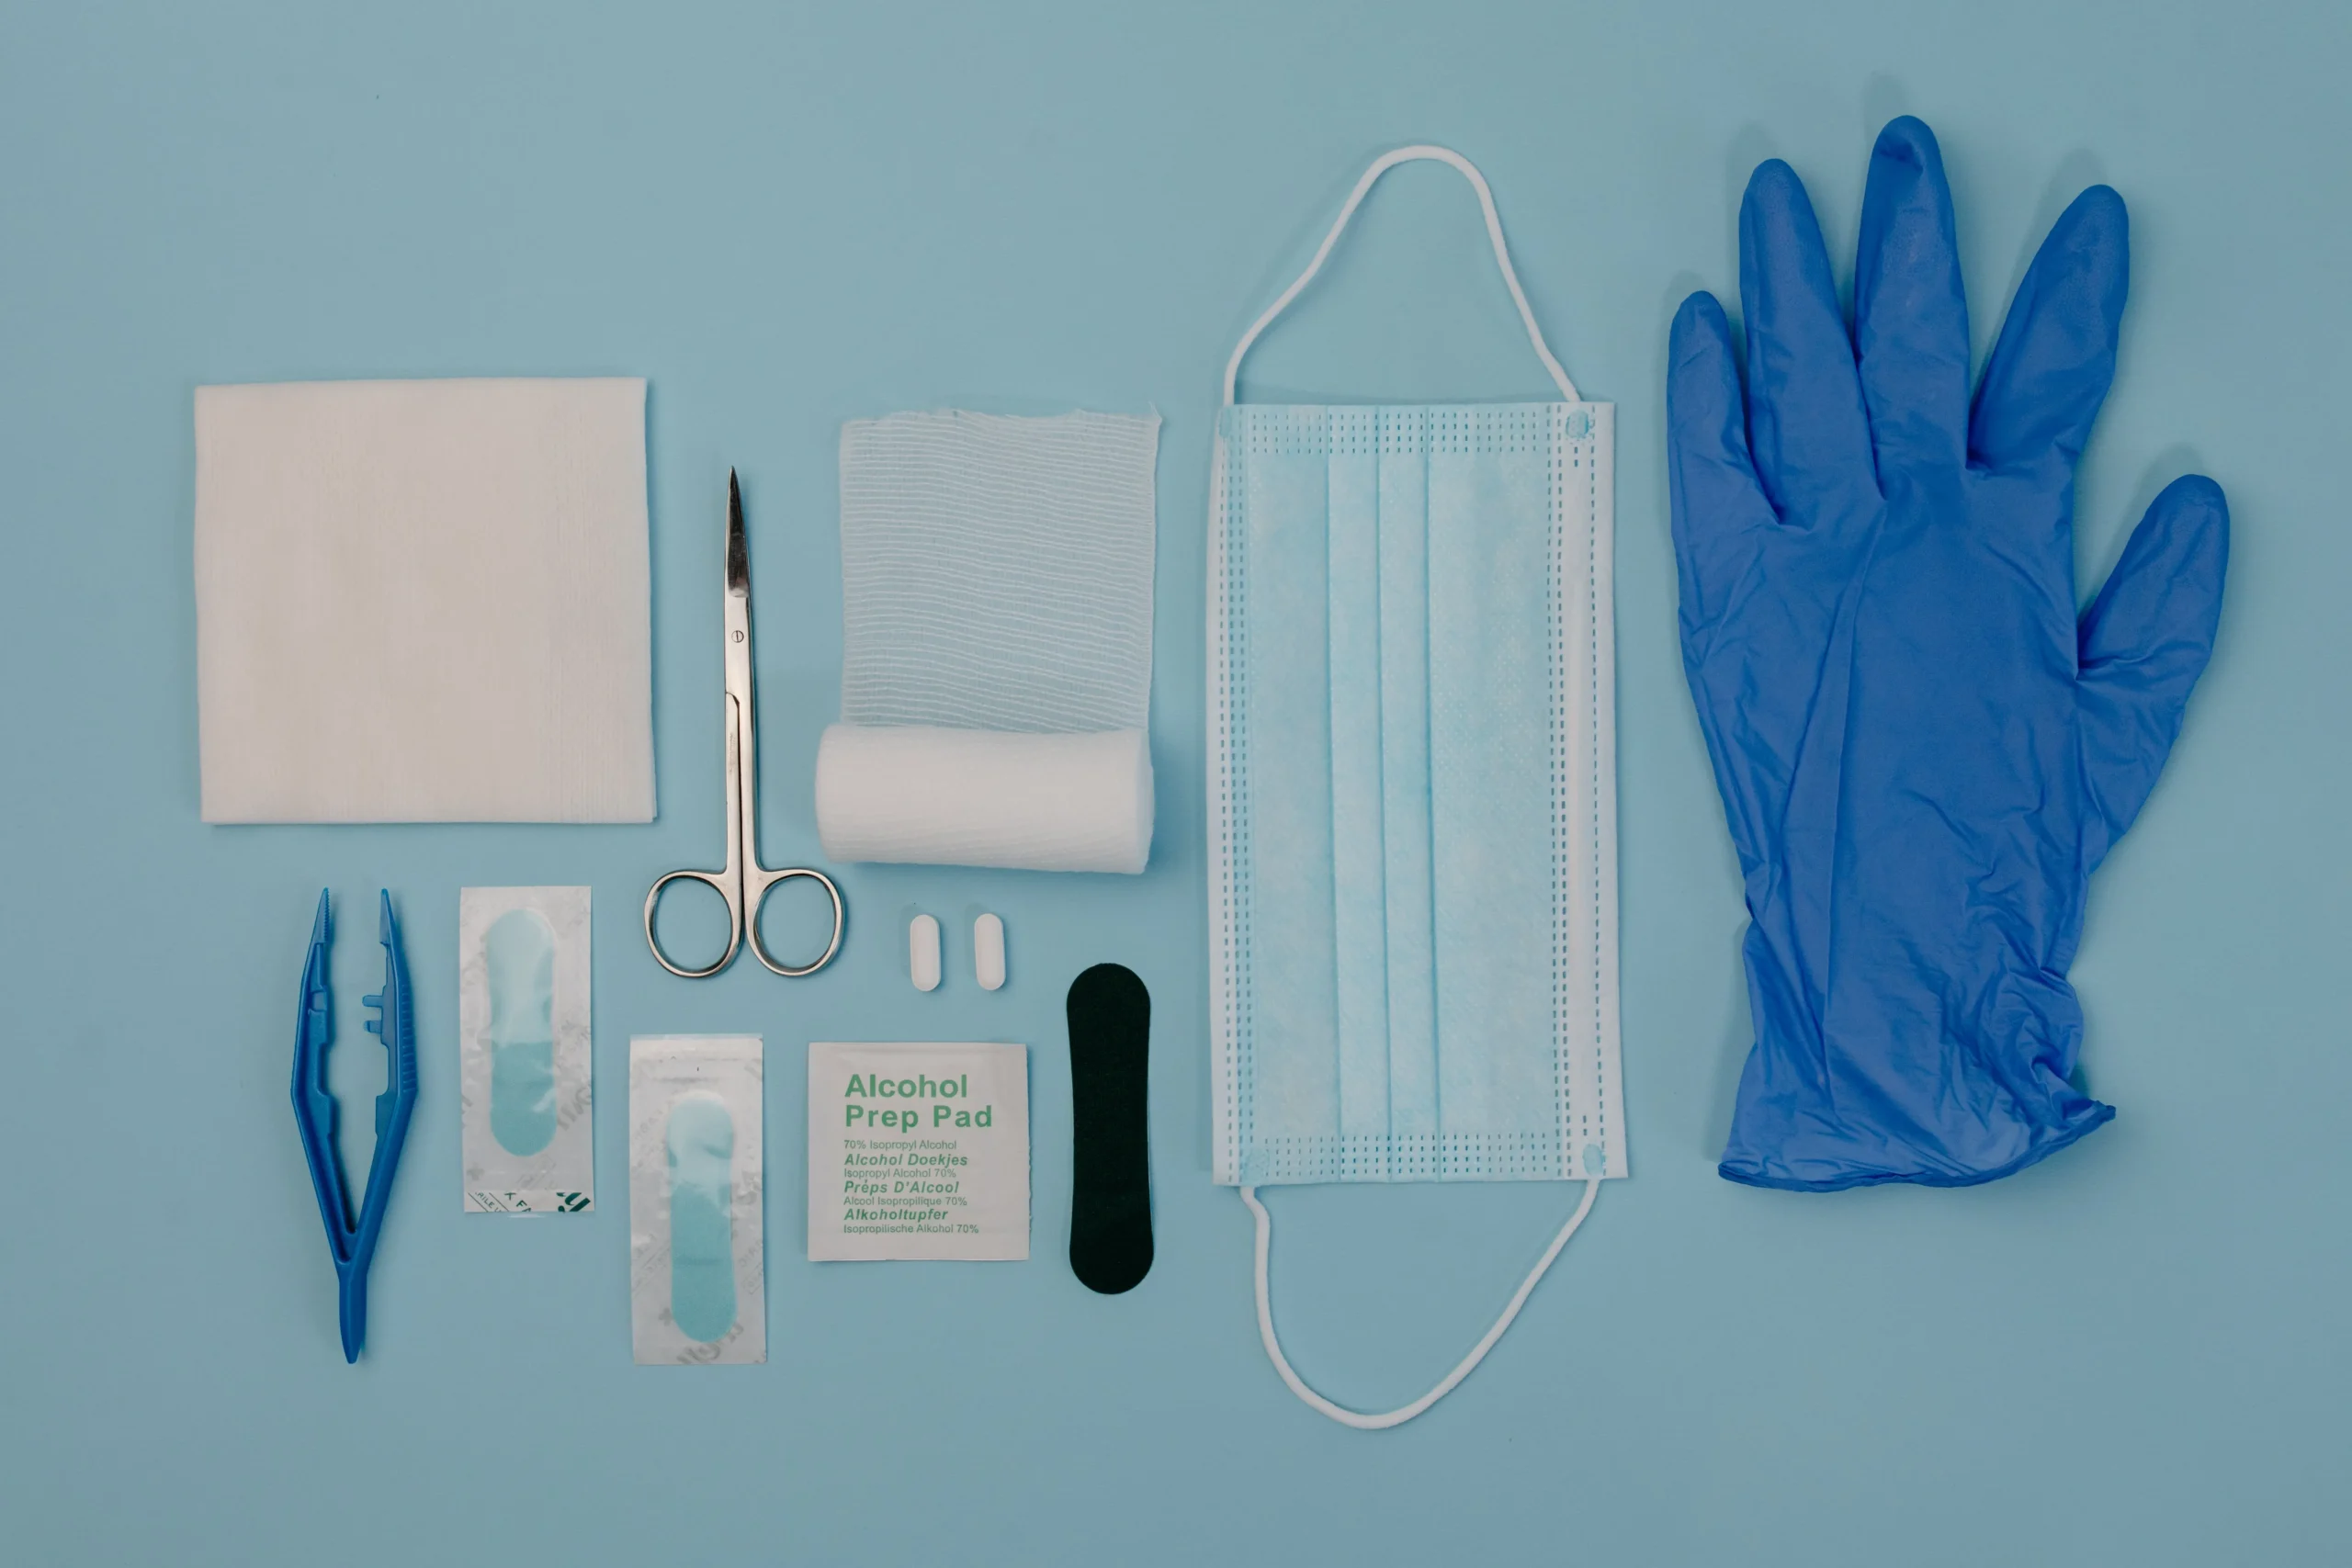 Picture of basics that should be in first aid kit such as gloves, scissors, alcohol prep wipes etc.